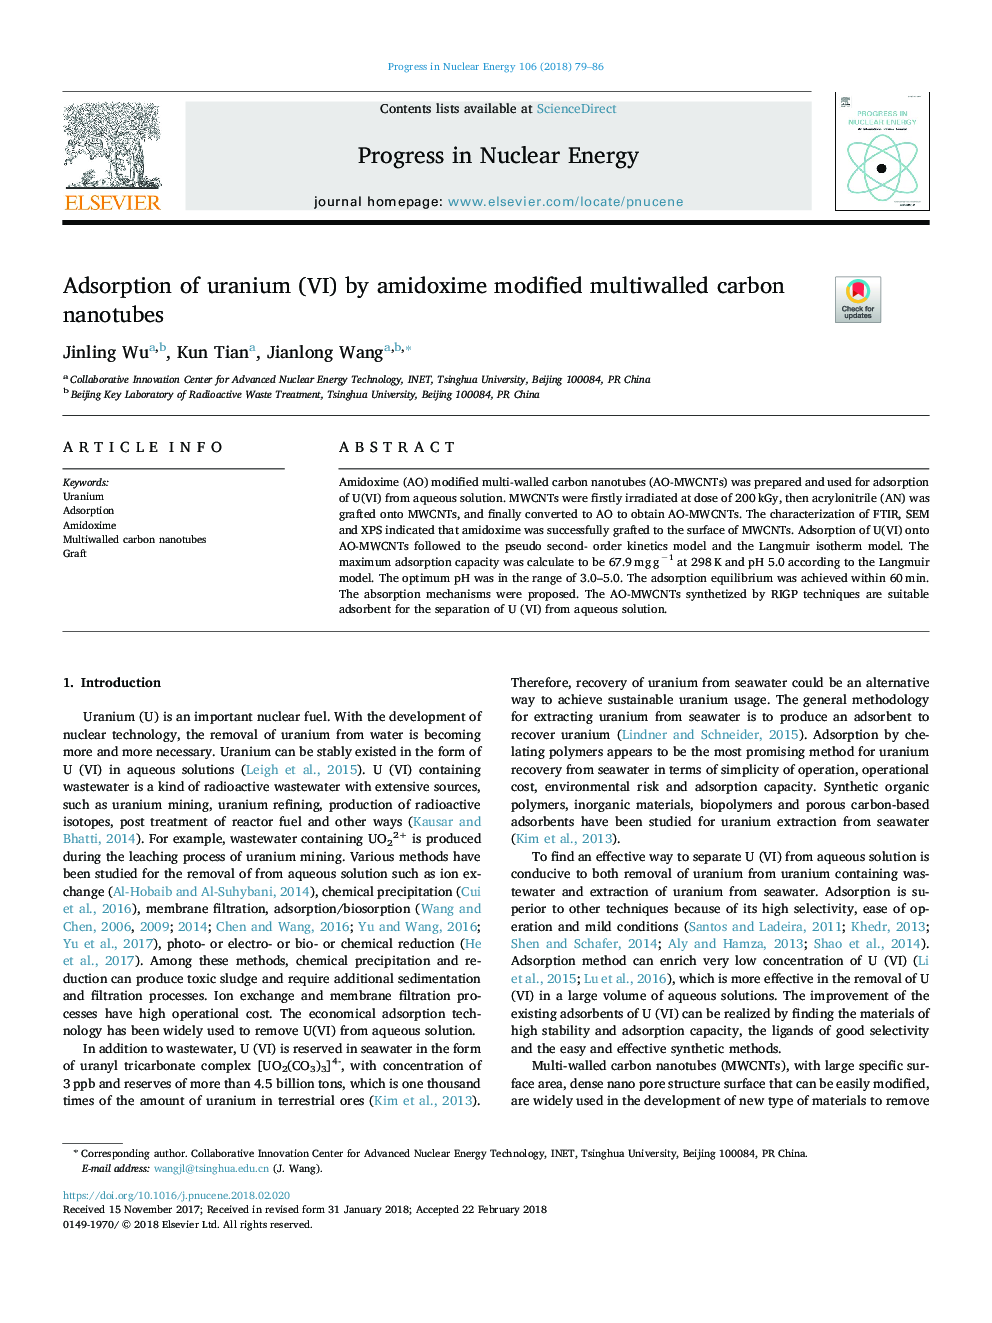 Adsorption of uranium (VI) by amidoxime modified multiwalled carbon nanotubes